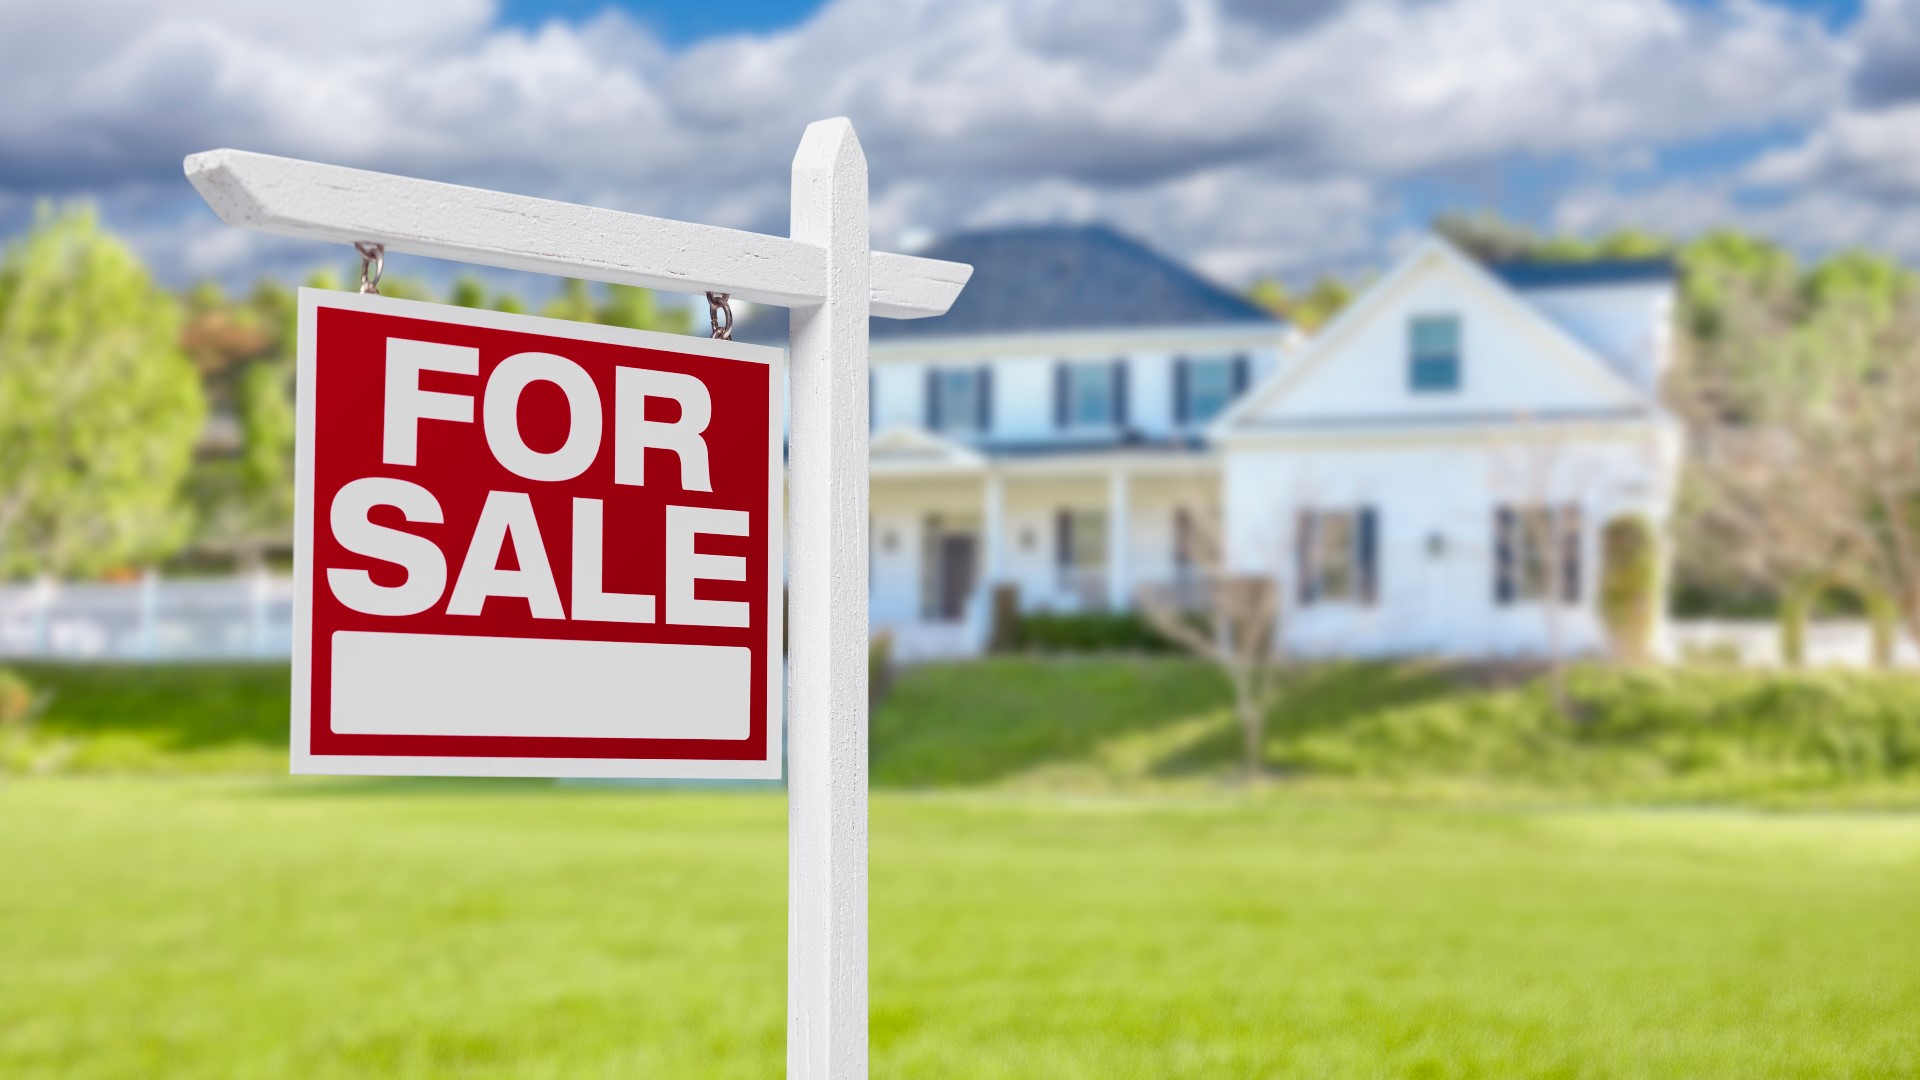 Homes sales in Indiana are down by 12% year to date.